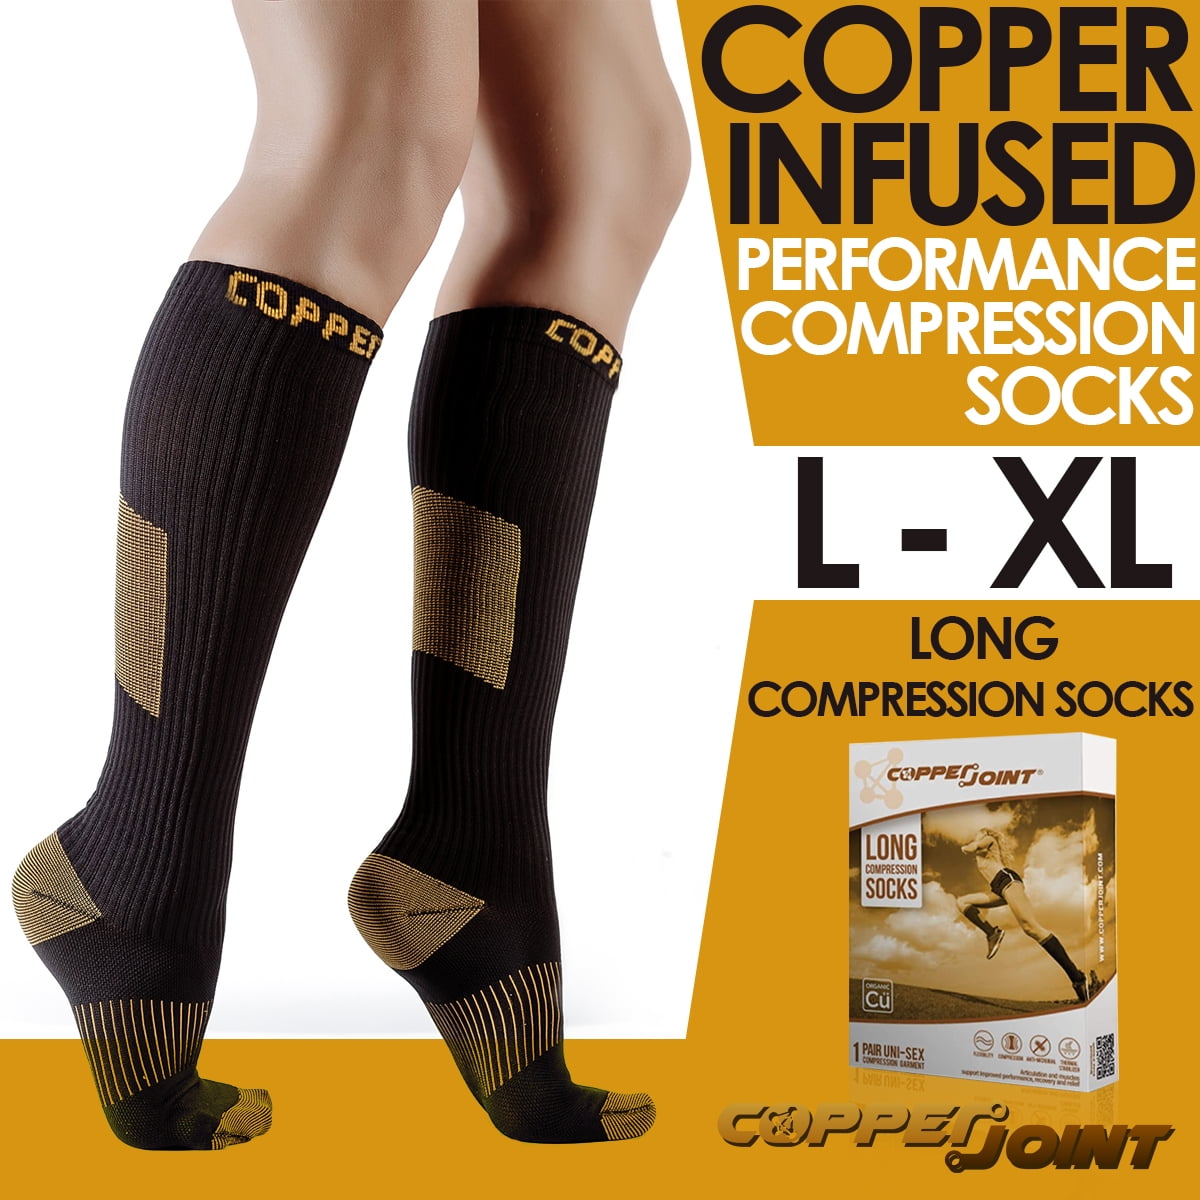 Copperjoint Long Compression Socks Copper Infused And Durable Design Unipression